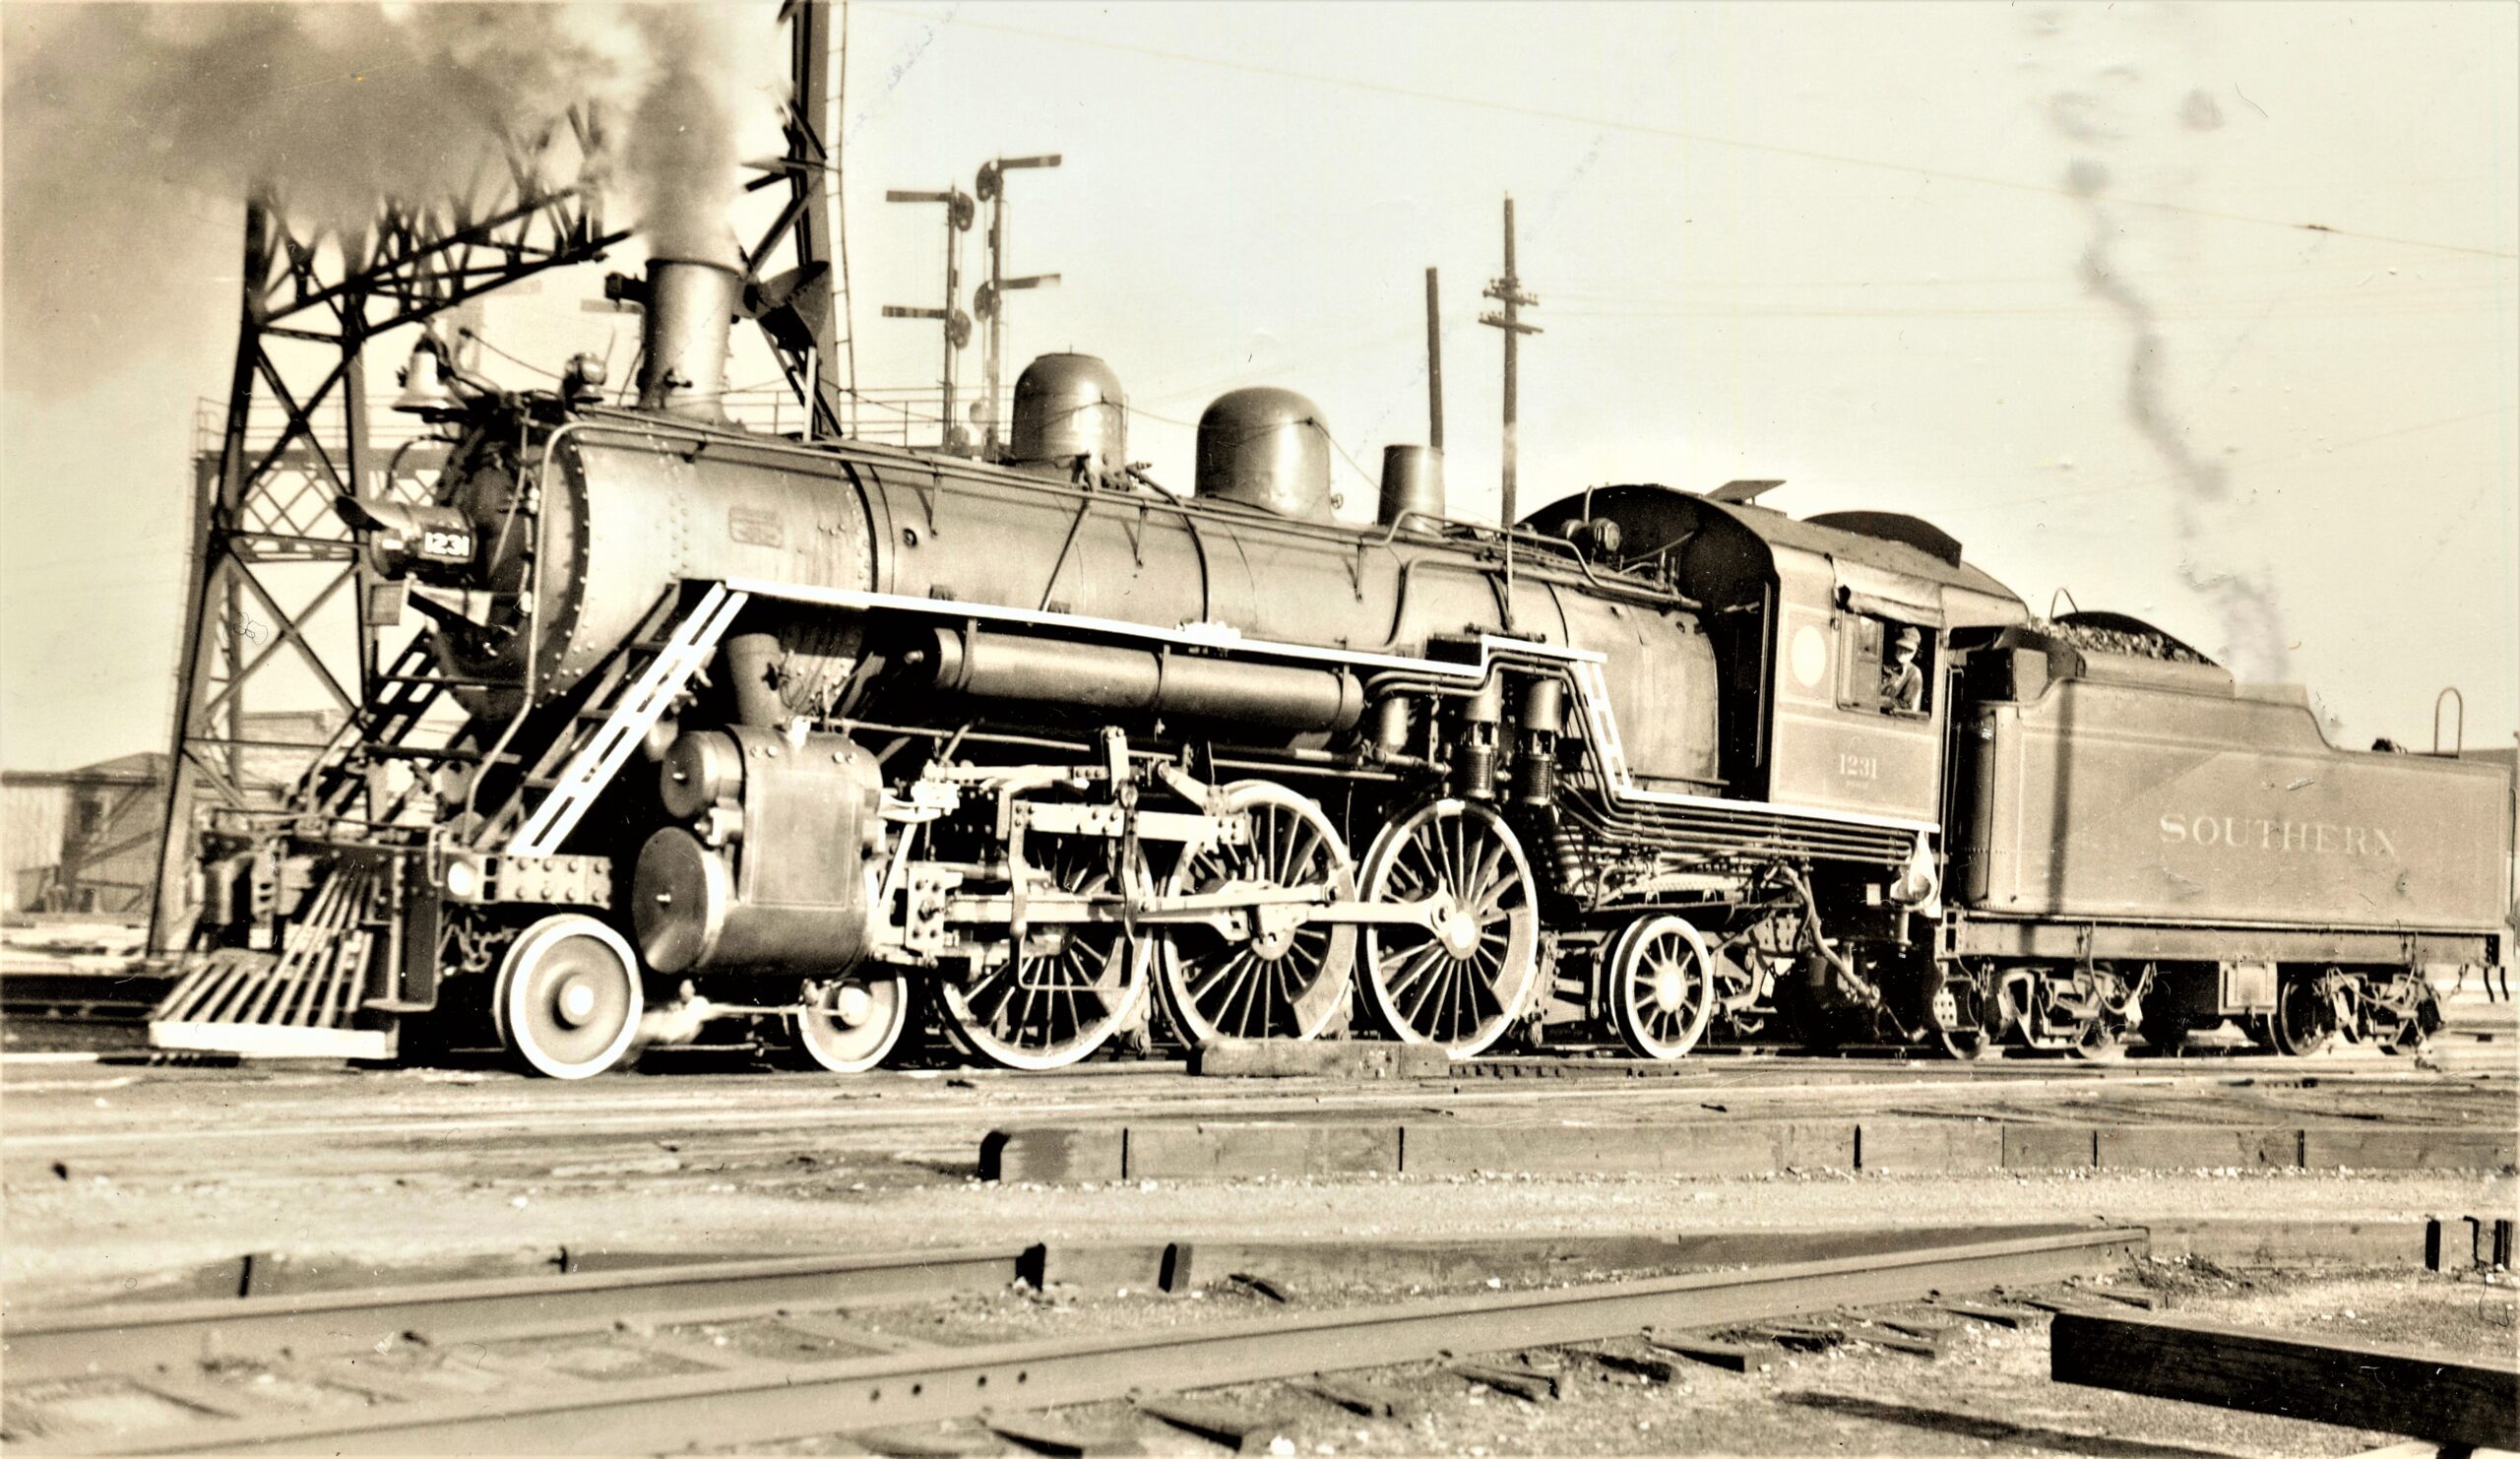 Southern Railway | Alexandria, Virginia | Class Ps2 4-6-2 #1231 Pacific steam locomotive | 1938 | unknown photographer